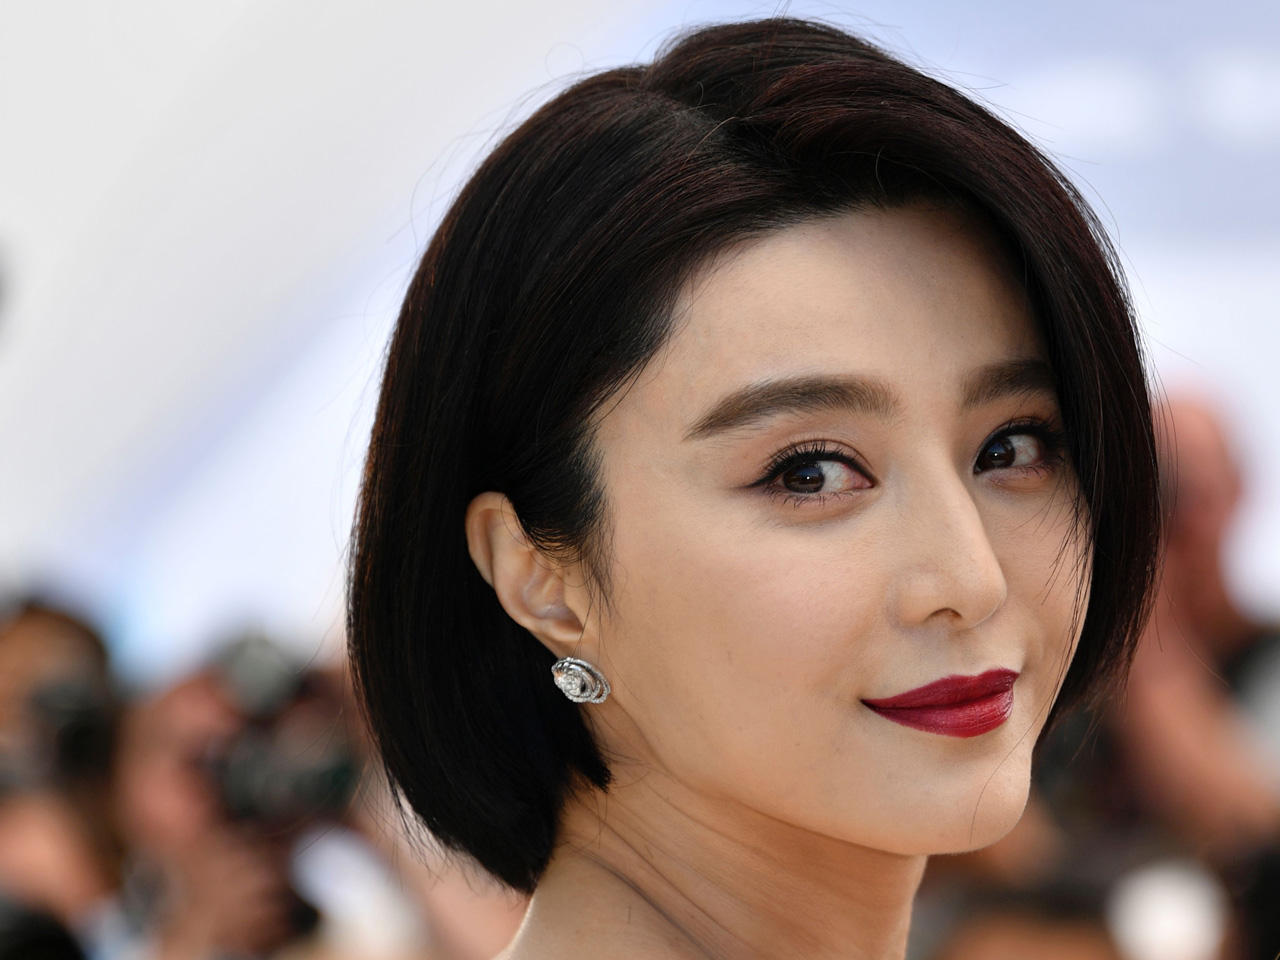 score Havslug Irreplaceable Fan Bingbing, Chinese actress disappears after role in "X-Men" movie after  vague claims of tax fraud in China - CBS News